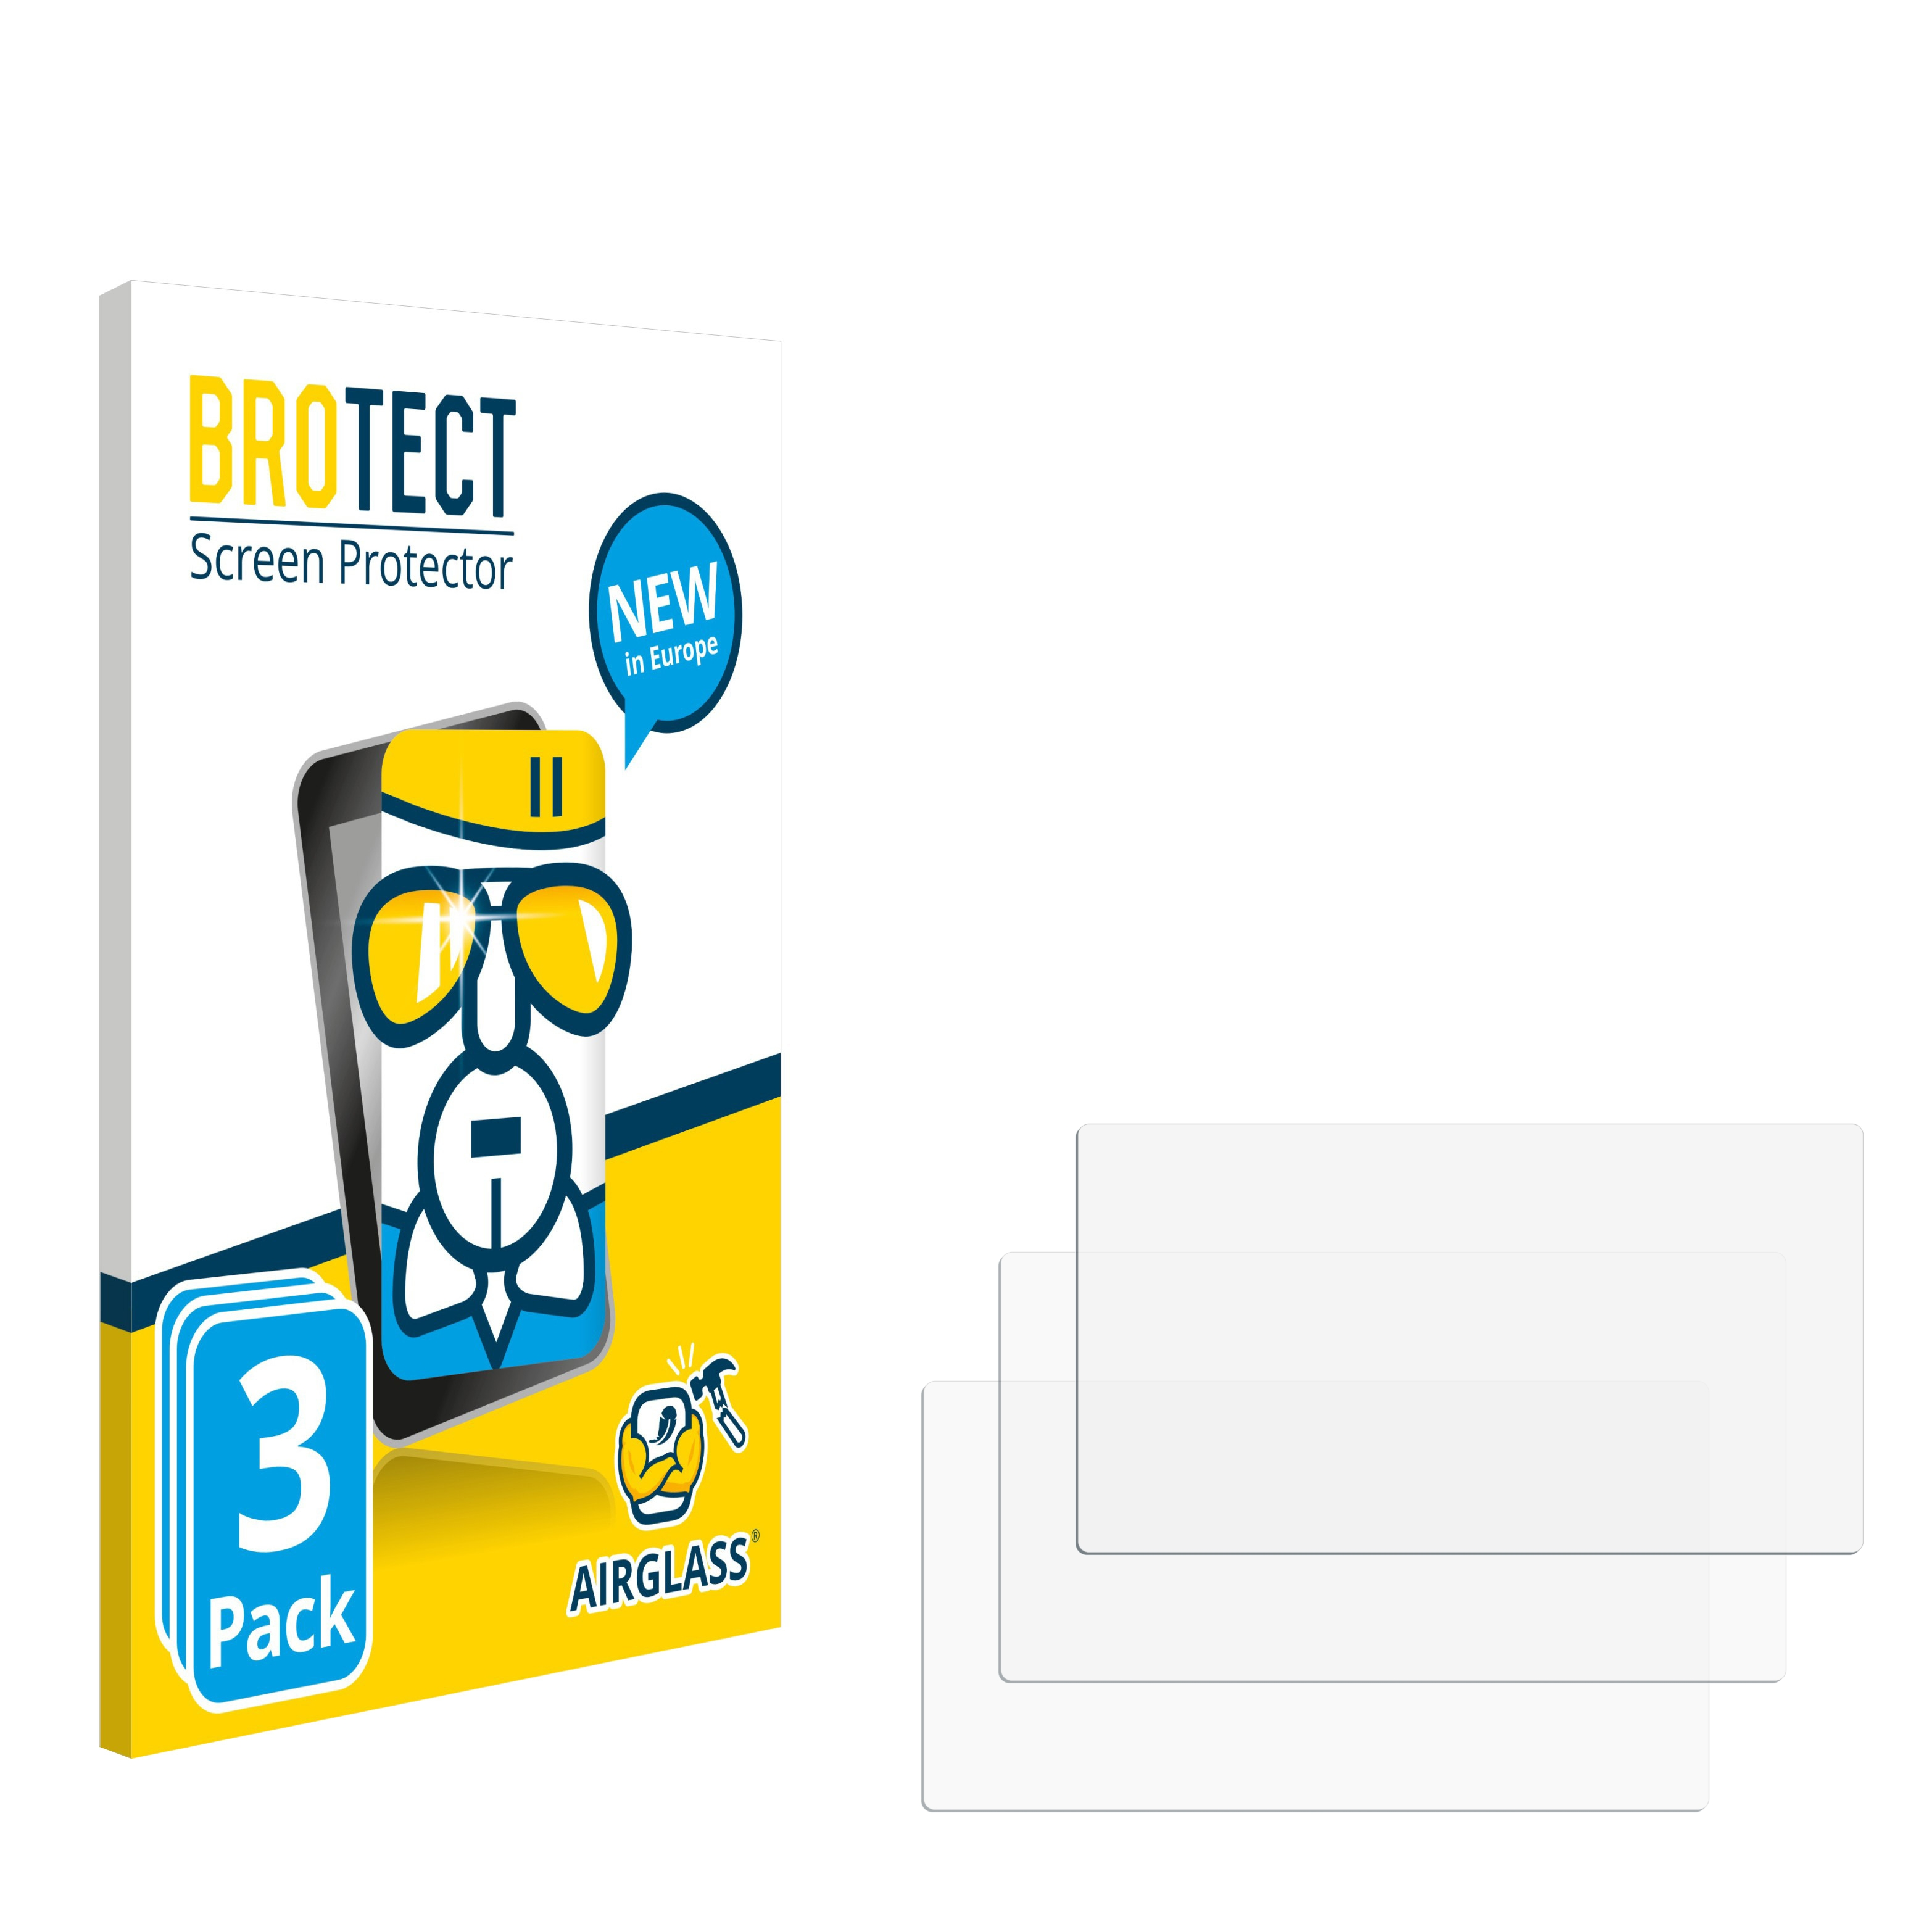 3x 500X Airglass 2016-2019 BROTECT Uconnect 6.5\